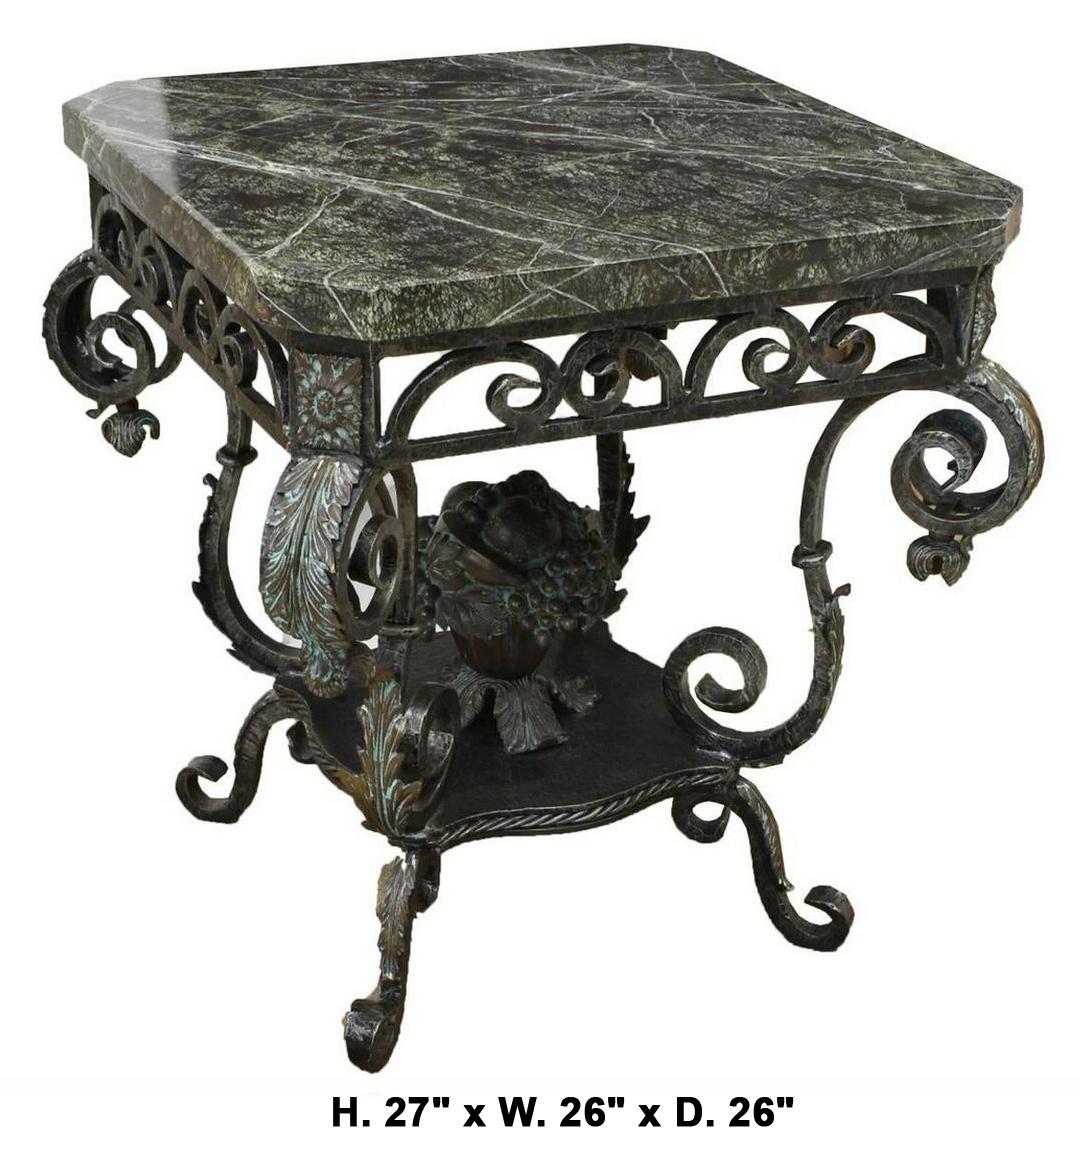 An Italian Baroque style table,
20th century.  

A square green marble top, rests over a scroll-motif wrought iron frieze decorated with rosettes, above four acanthus decorated scrolling legs, conjoined by a platform centered by an iron floral